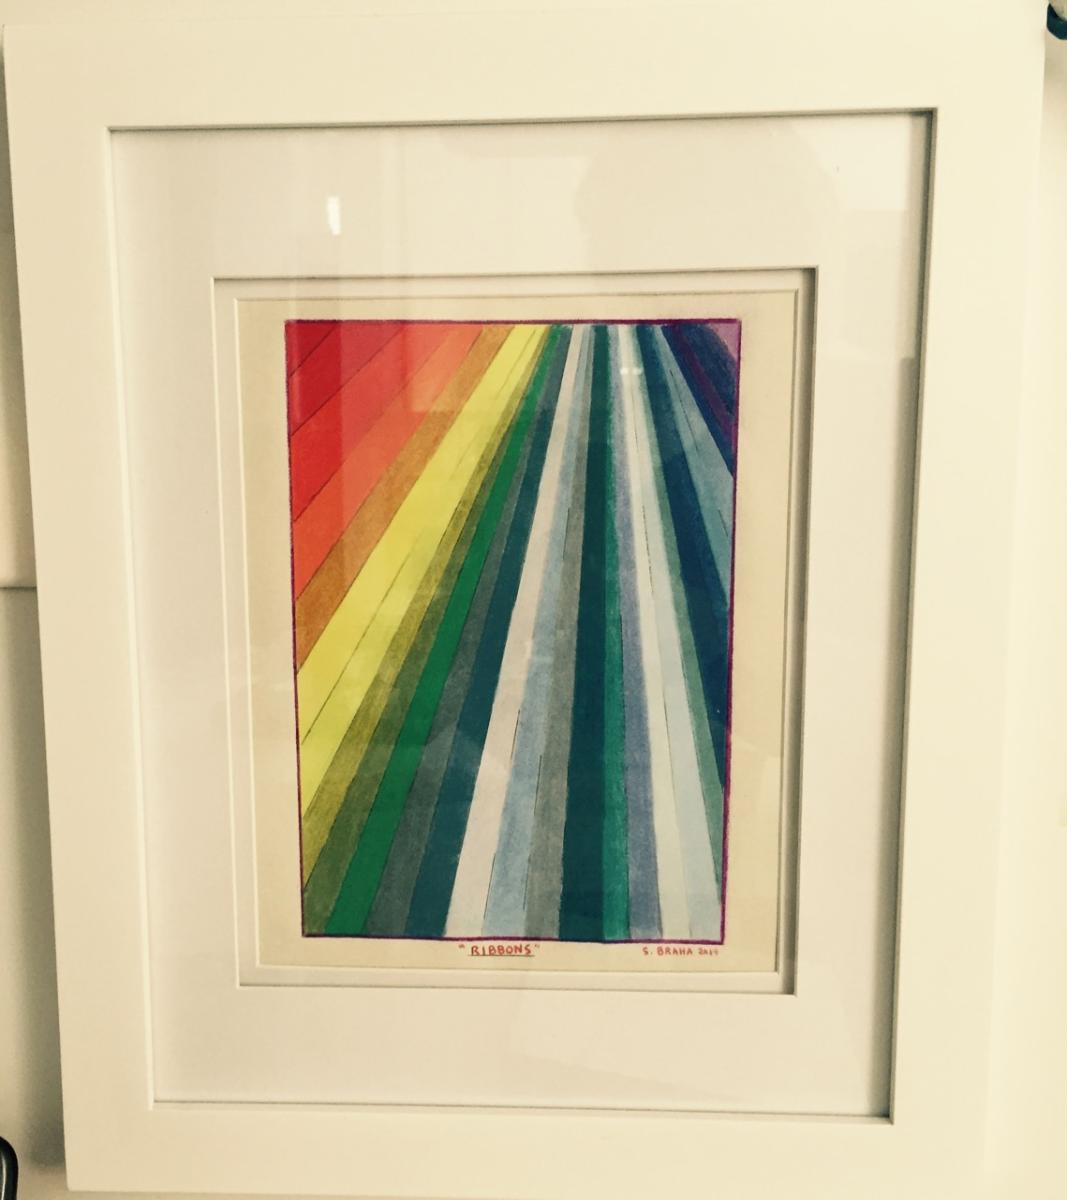 "Ribbons"
 Original done in
Colored pencils 
Brooklyn Apartment : Abstracts : Susan Braha Photography and Fine Art